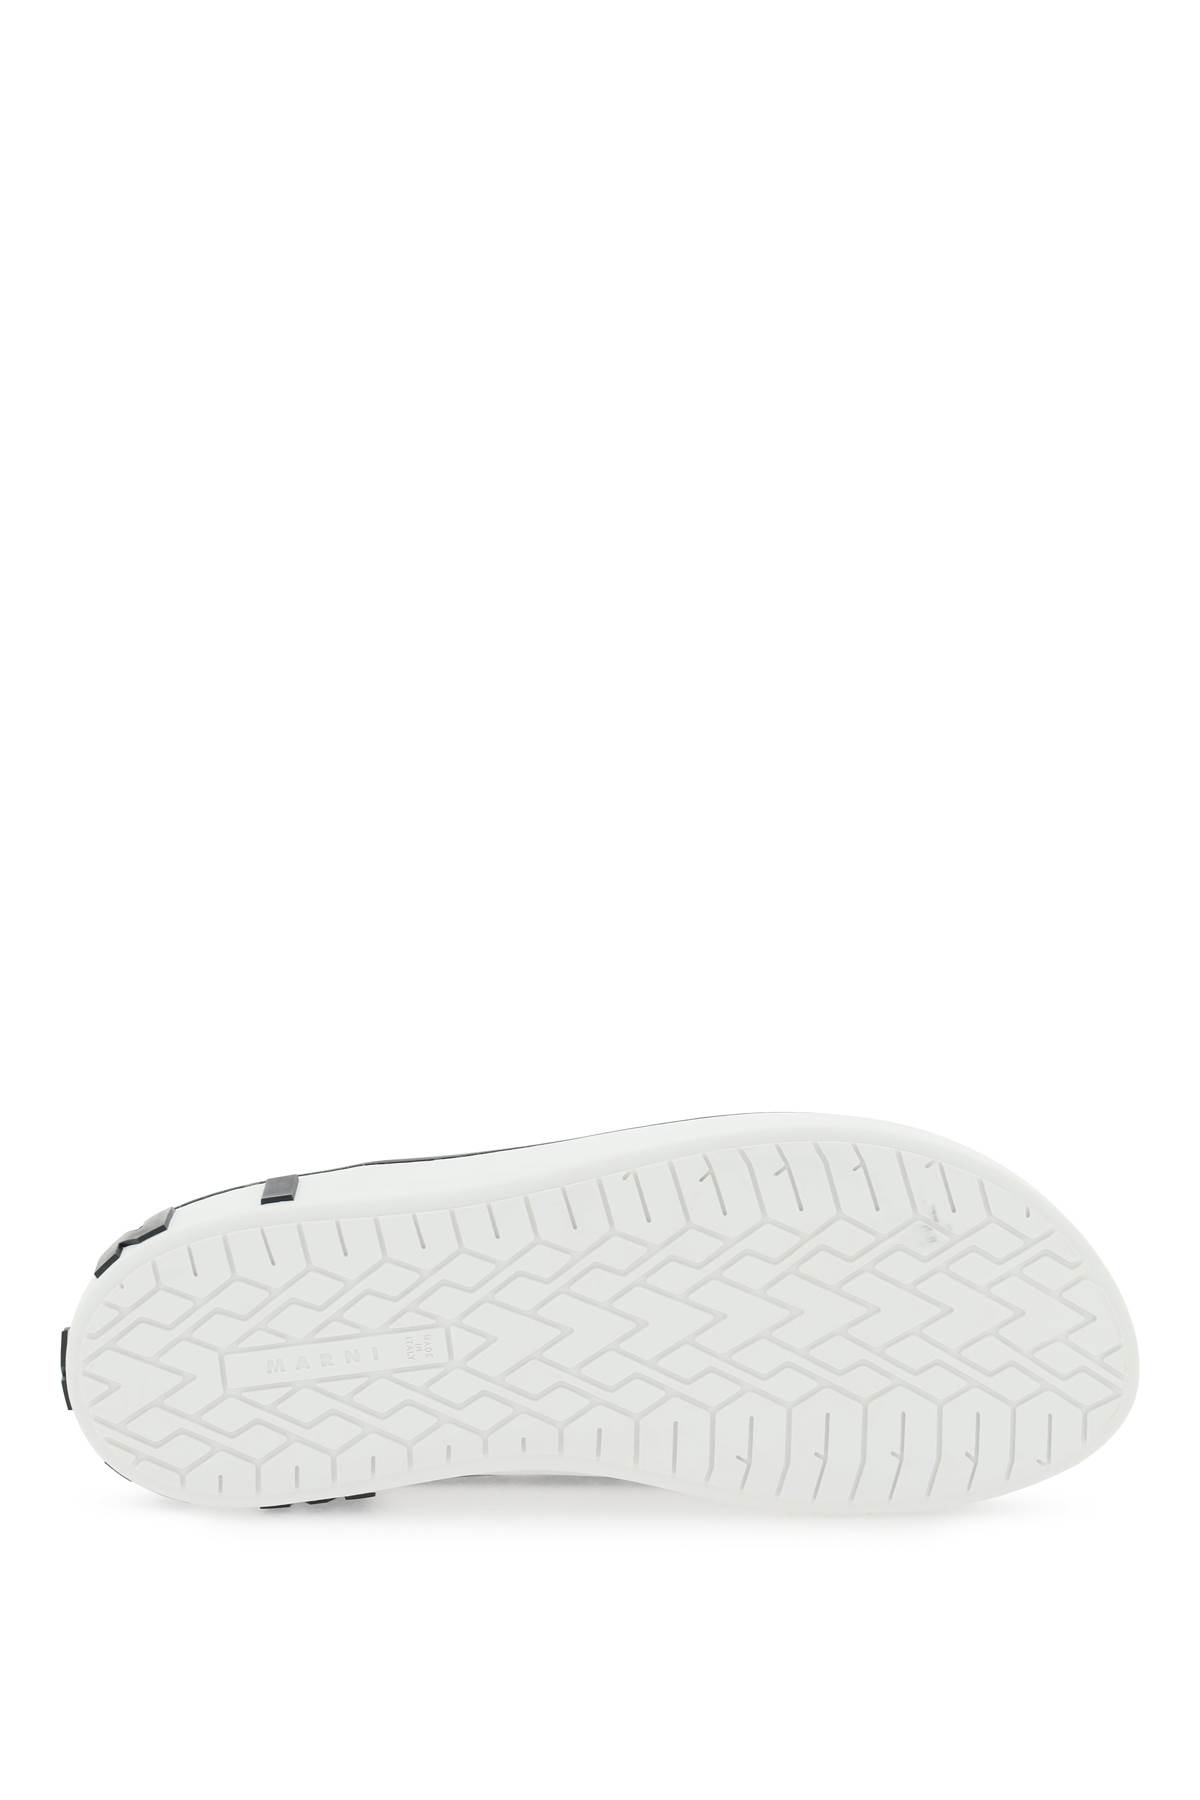 Shop Marni Slip-on Sneakers In Forest Green Stone White (green)